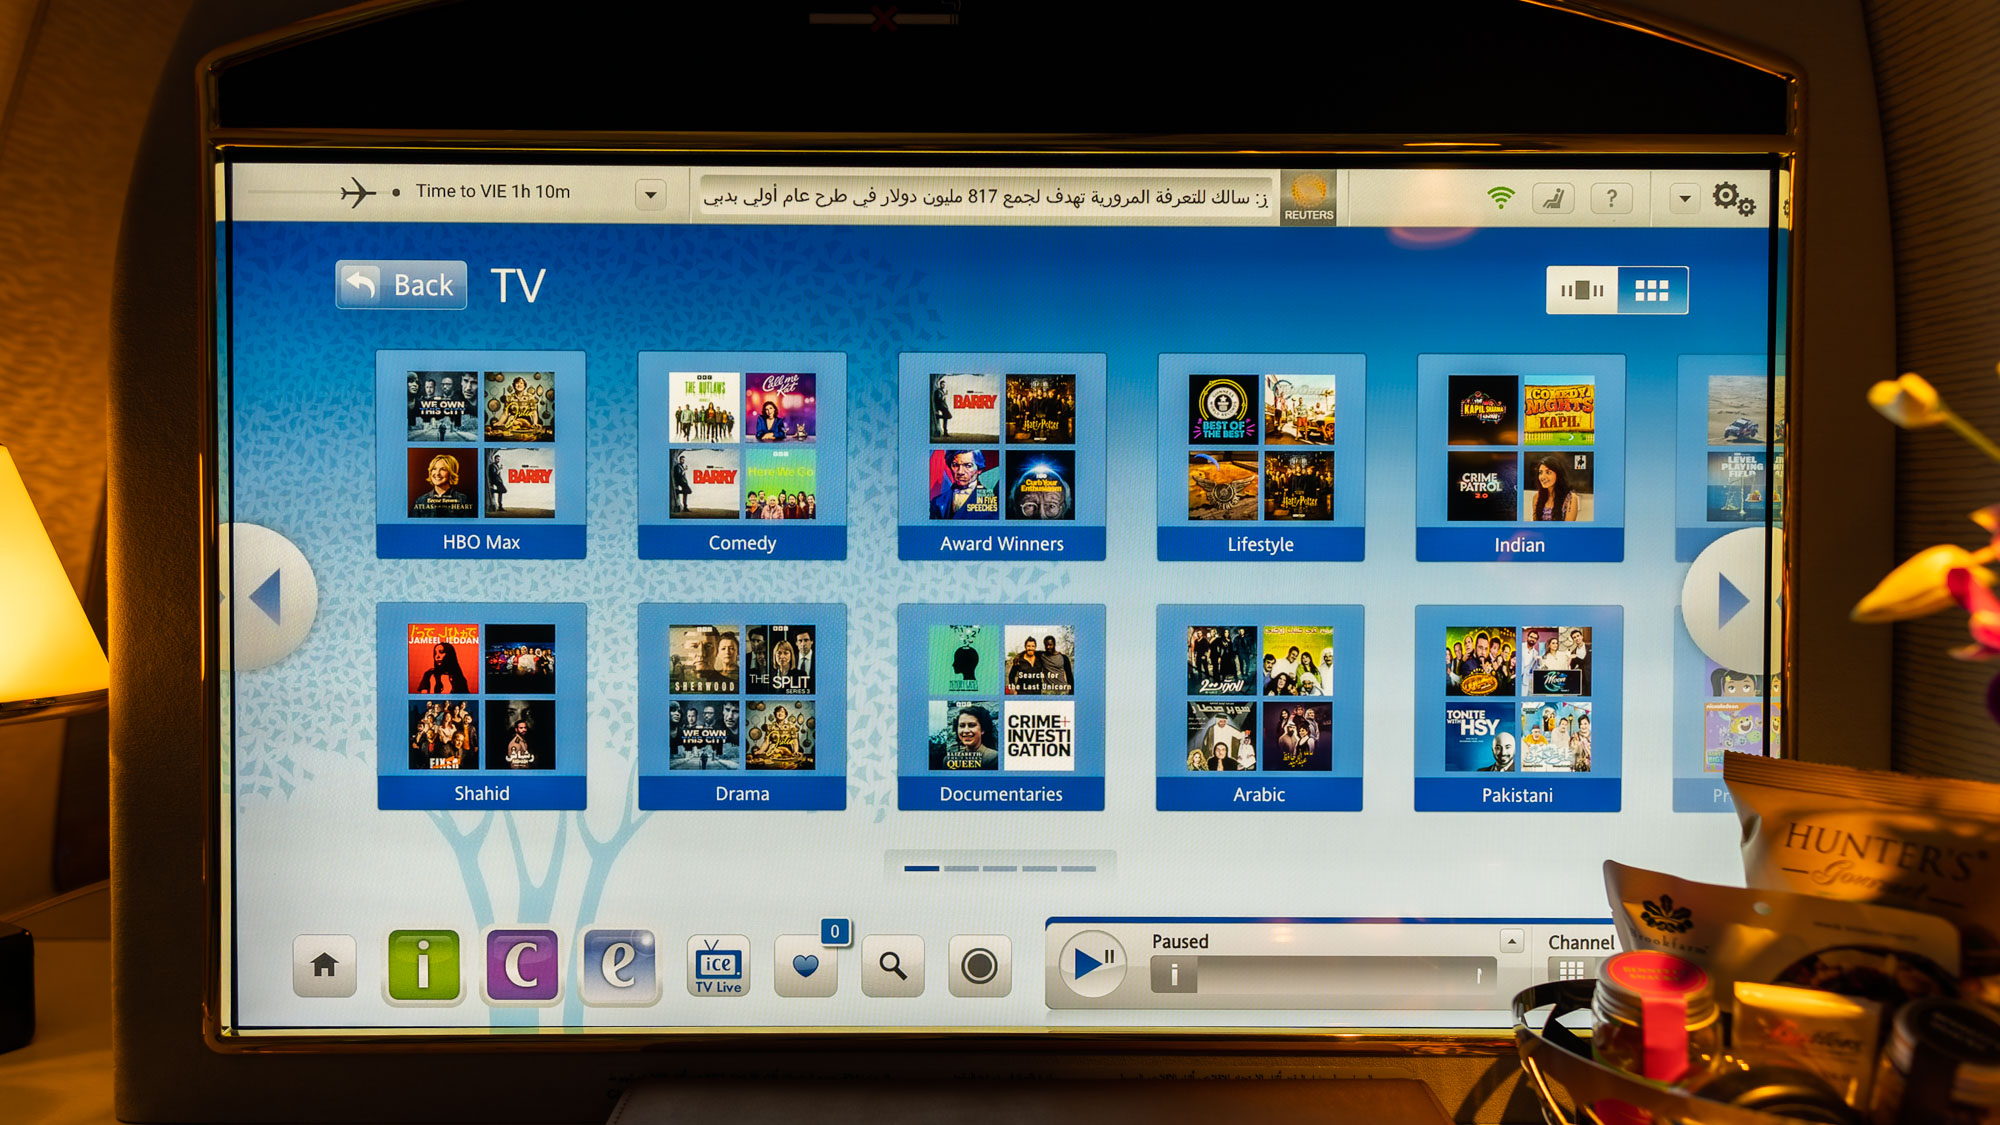 Emirates First Class TV shows